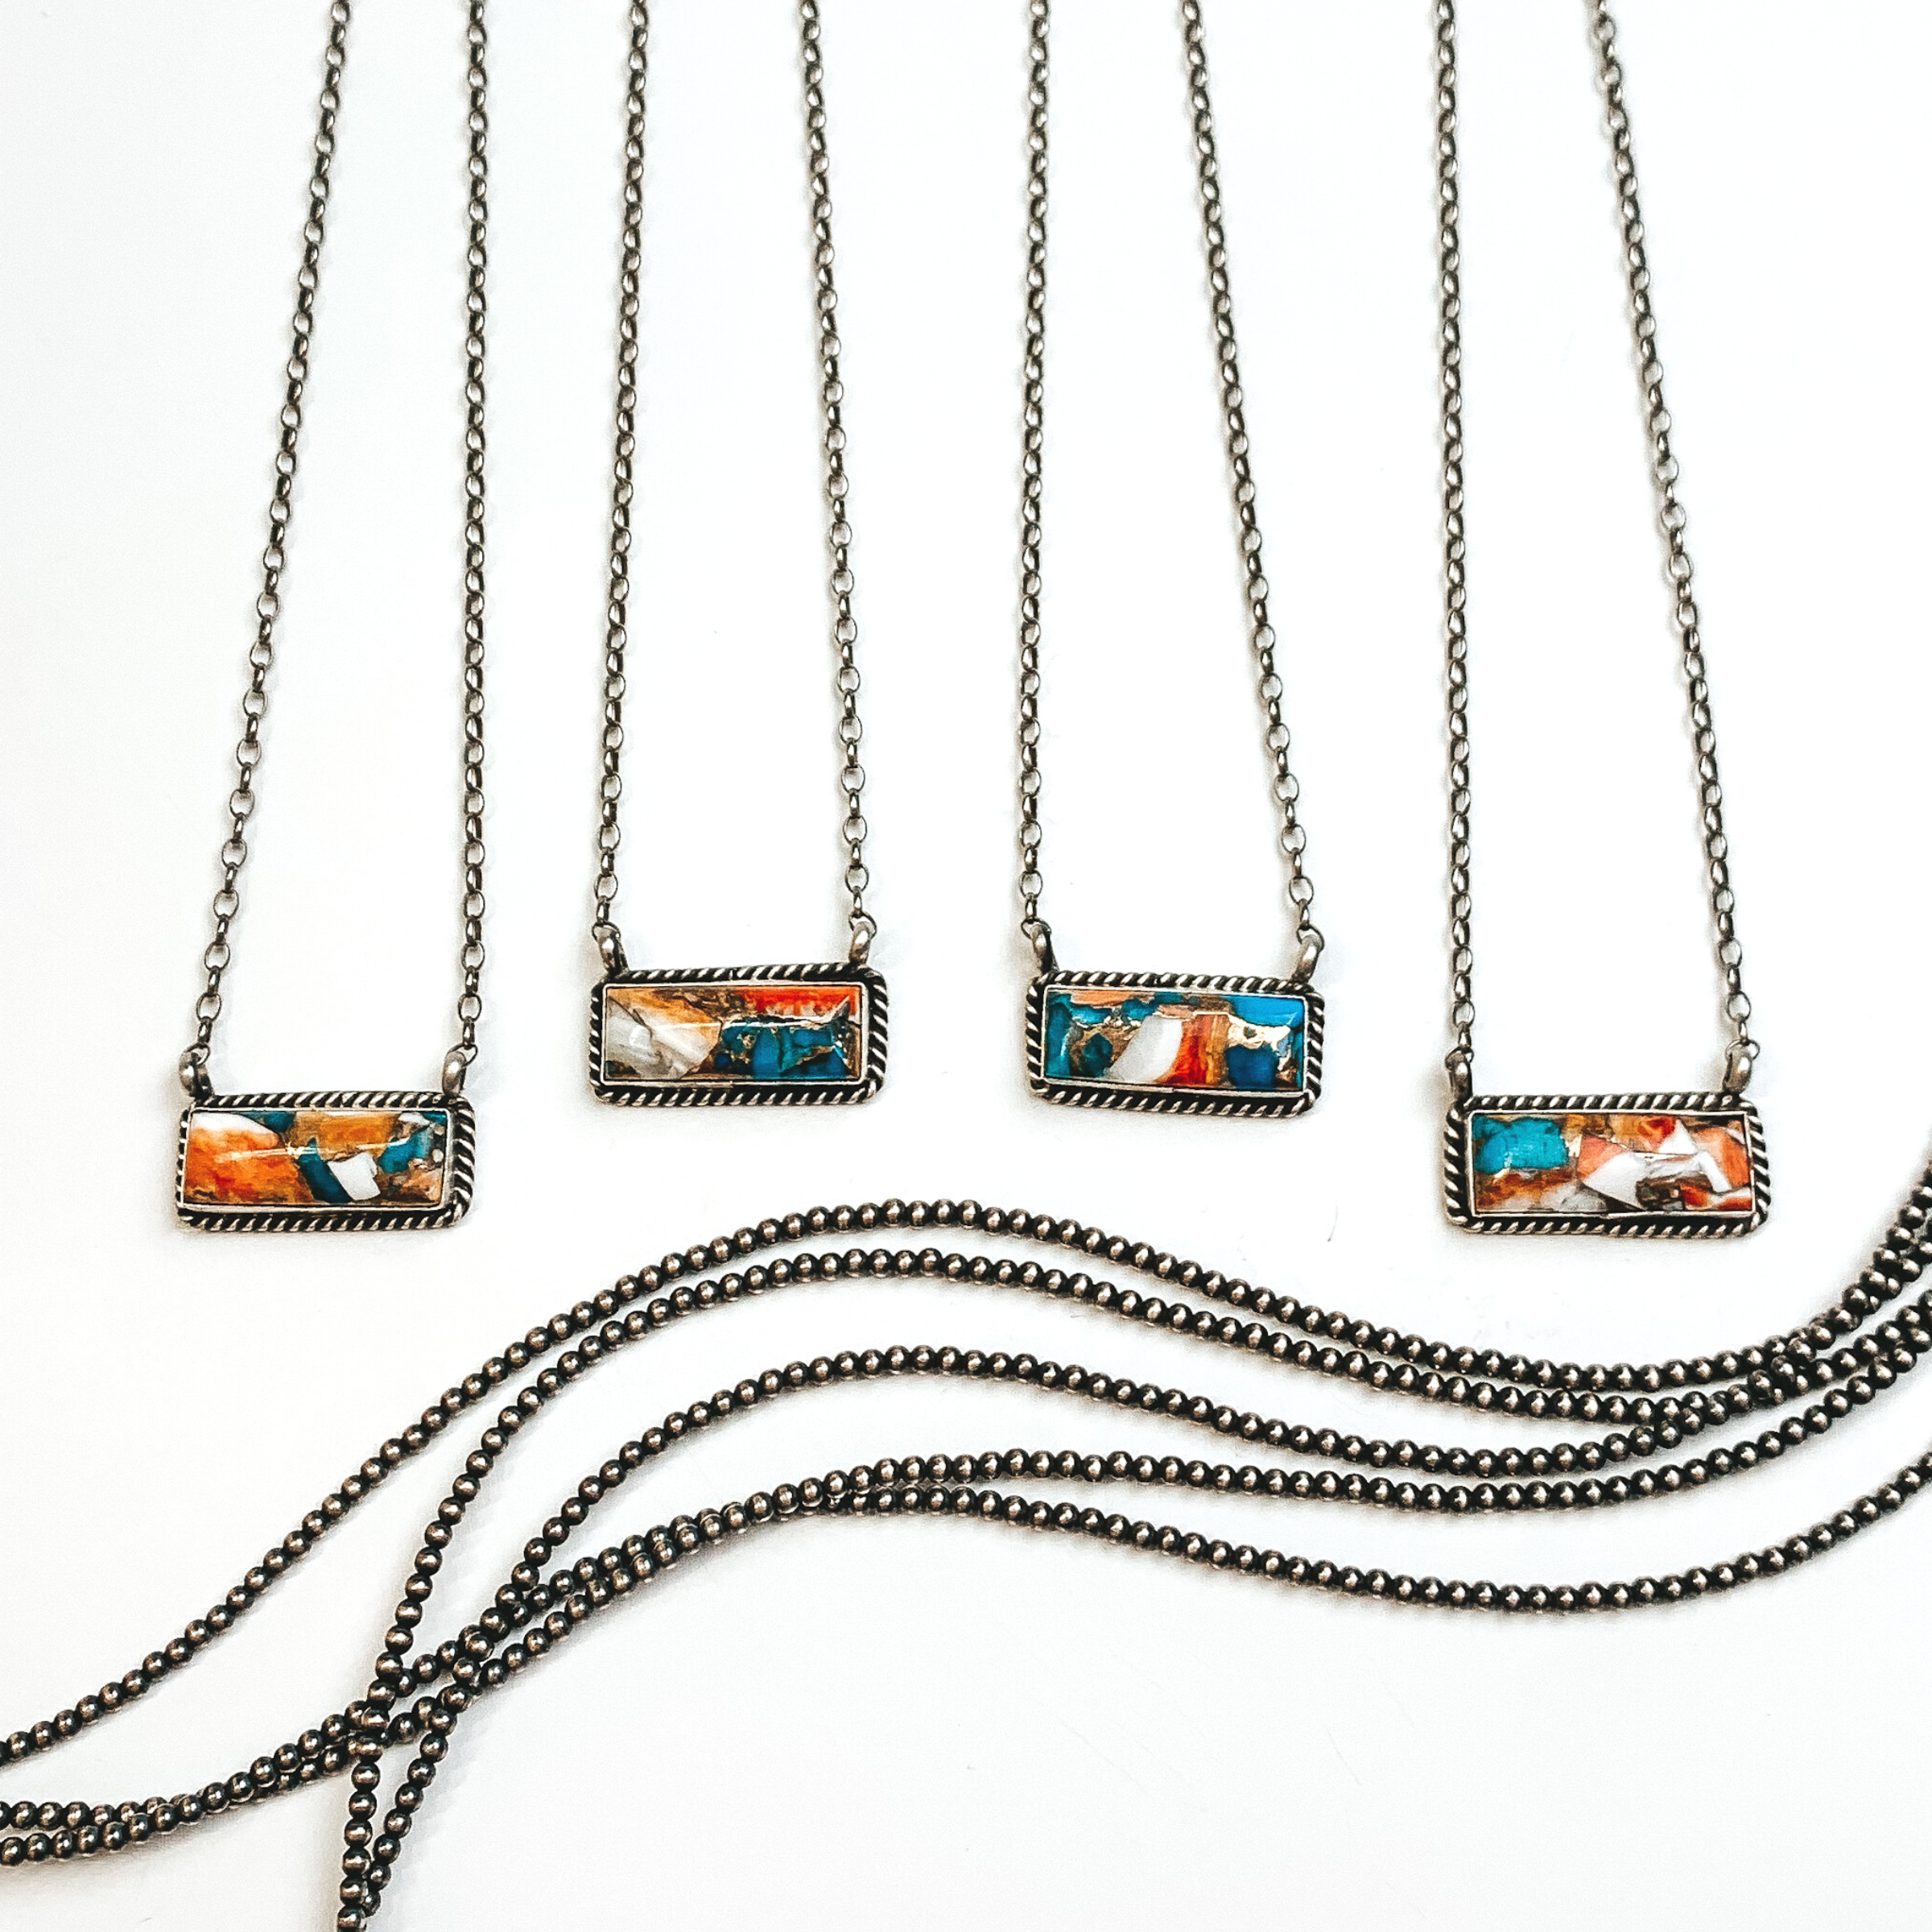 Four silver chain necklaces with rectangle bars that have a spiny oyster and turquoise remix stone. These necklaces are pictured on a white background with silver beads under the necklaces. 